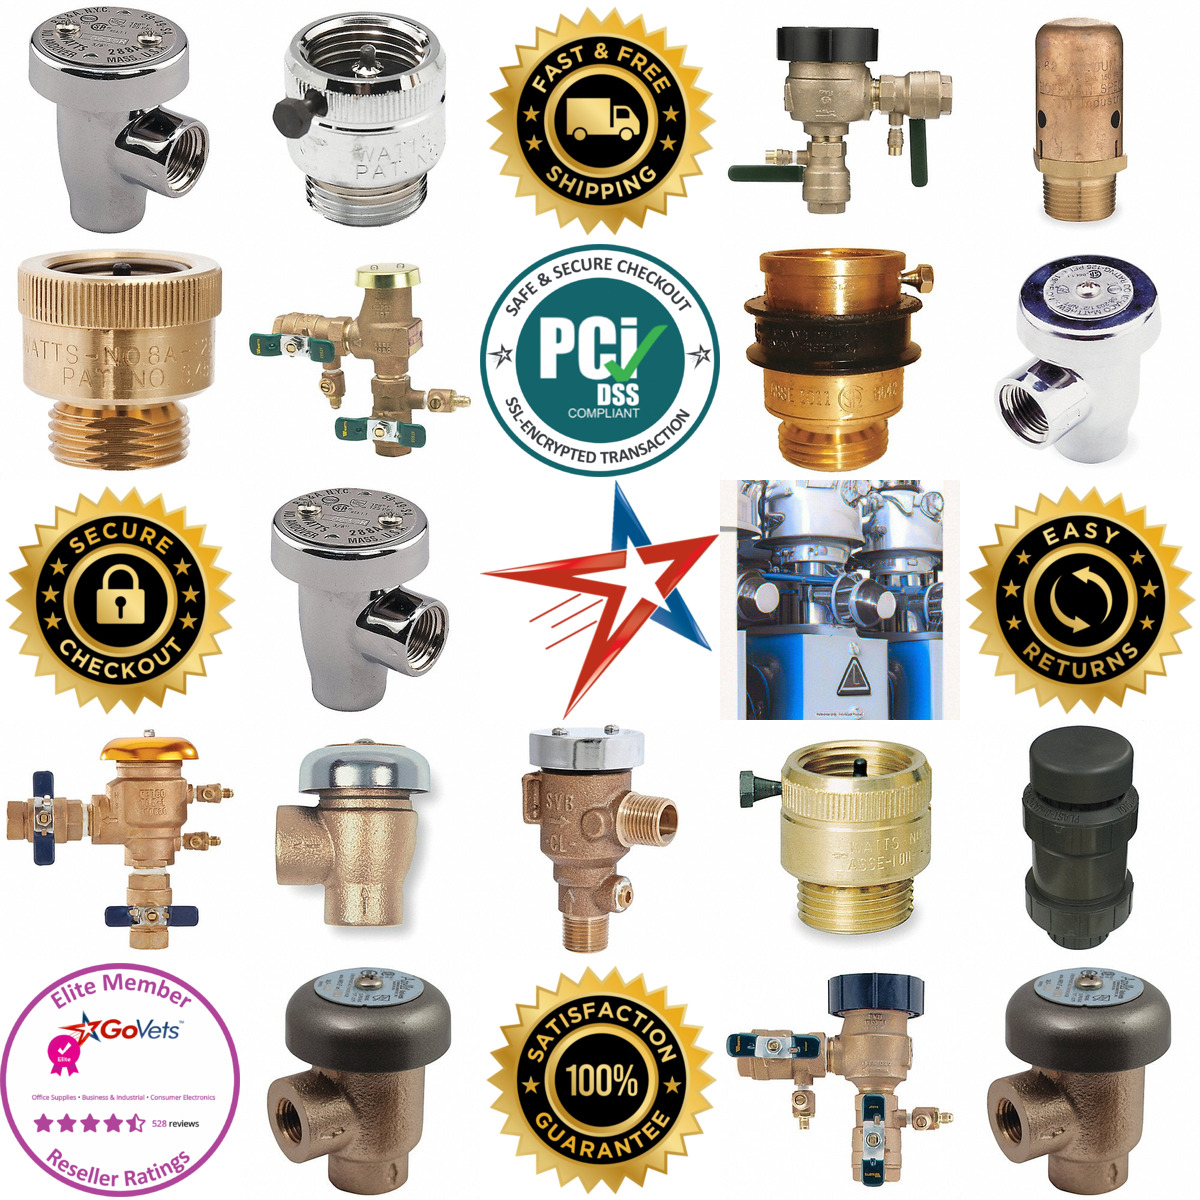 A selection of Vacuum Breakers products on GoVets